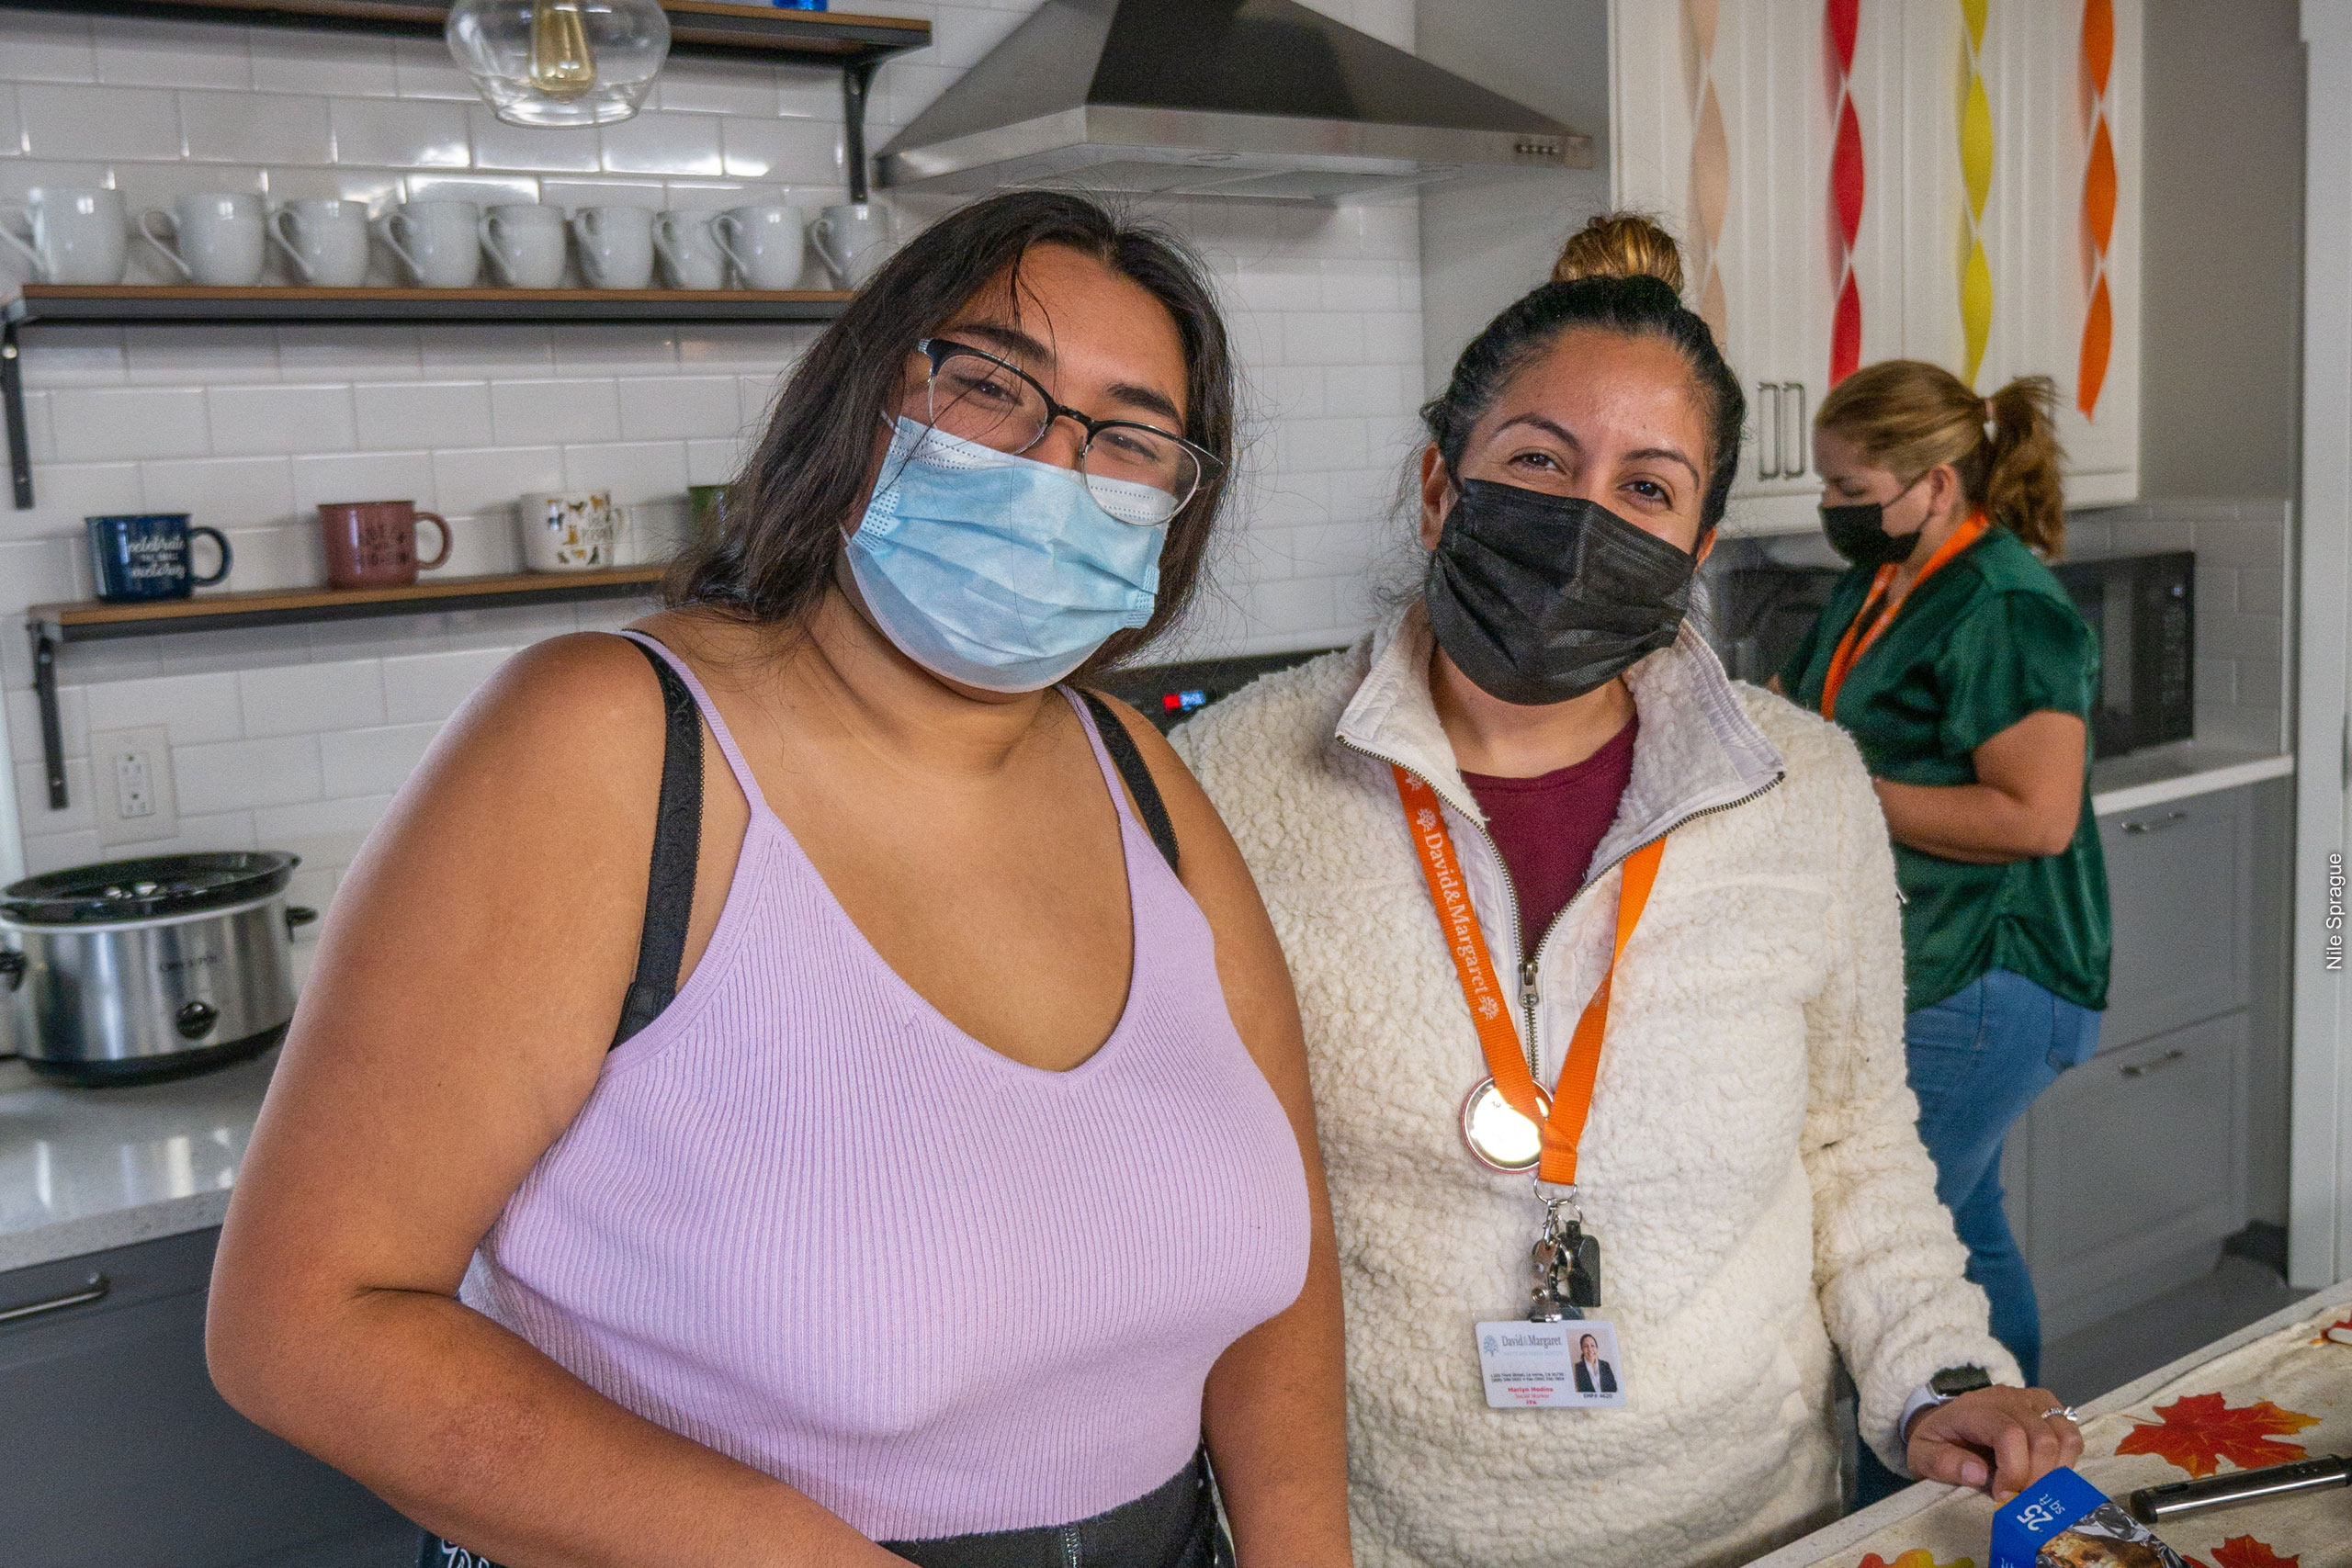 Cecilia Flores prepares a meal with Marilyn Medina in the student kitchen and lounge at David and Margaret Youth and Family Services in La Verne, California.